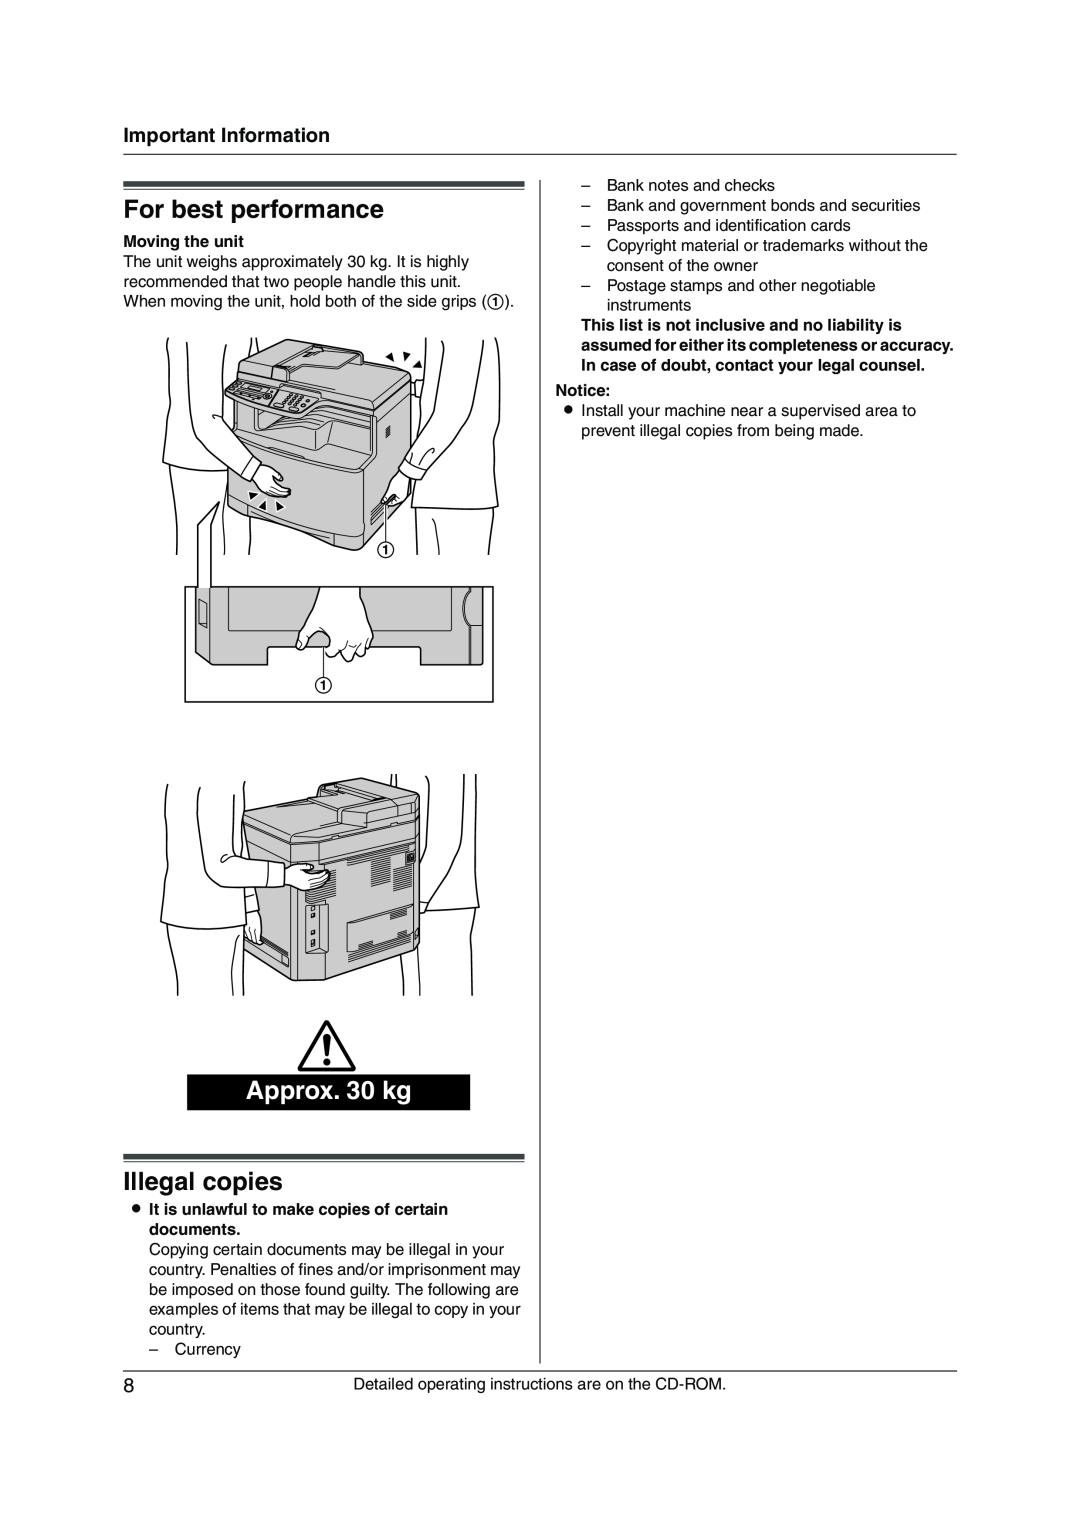 Panasonic KX-MC6020CX operating instructions For best performance, Illegal copies, Approx. 30 kg, Important Information 